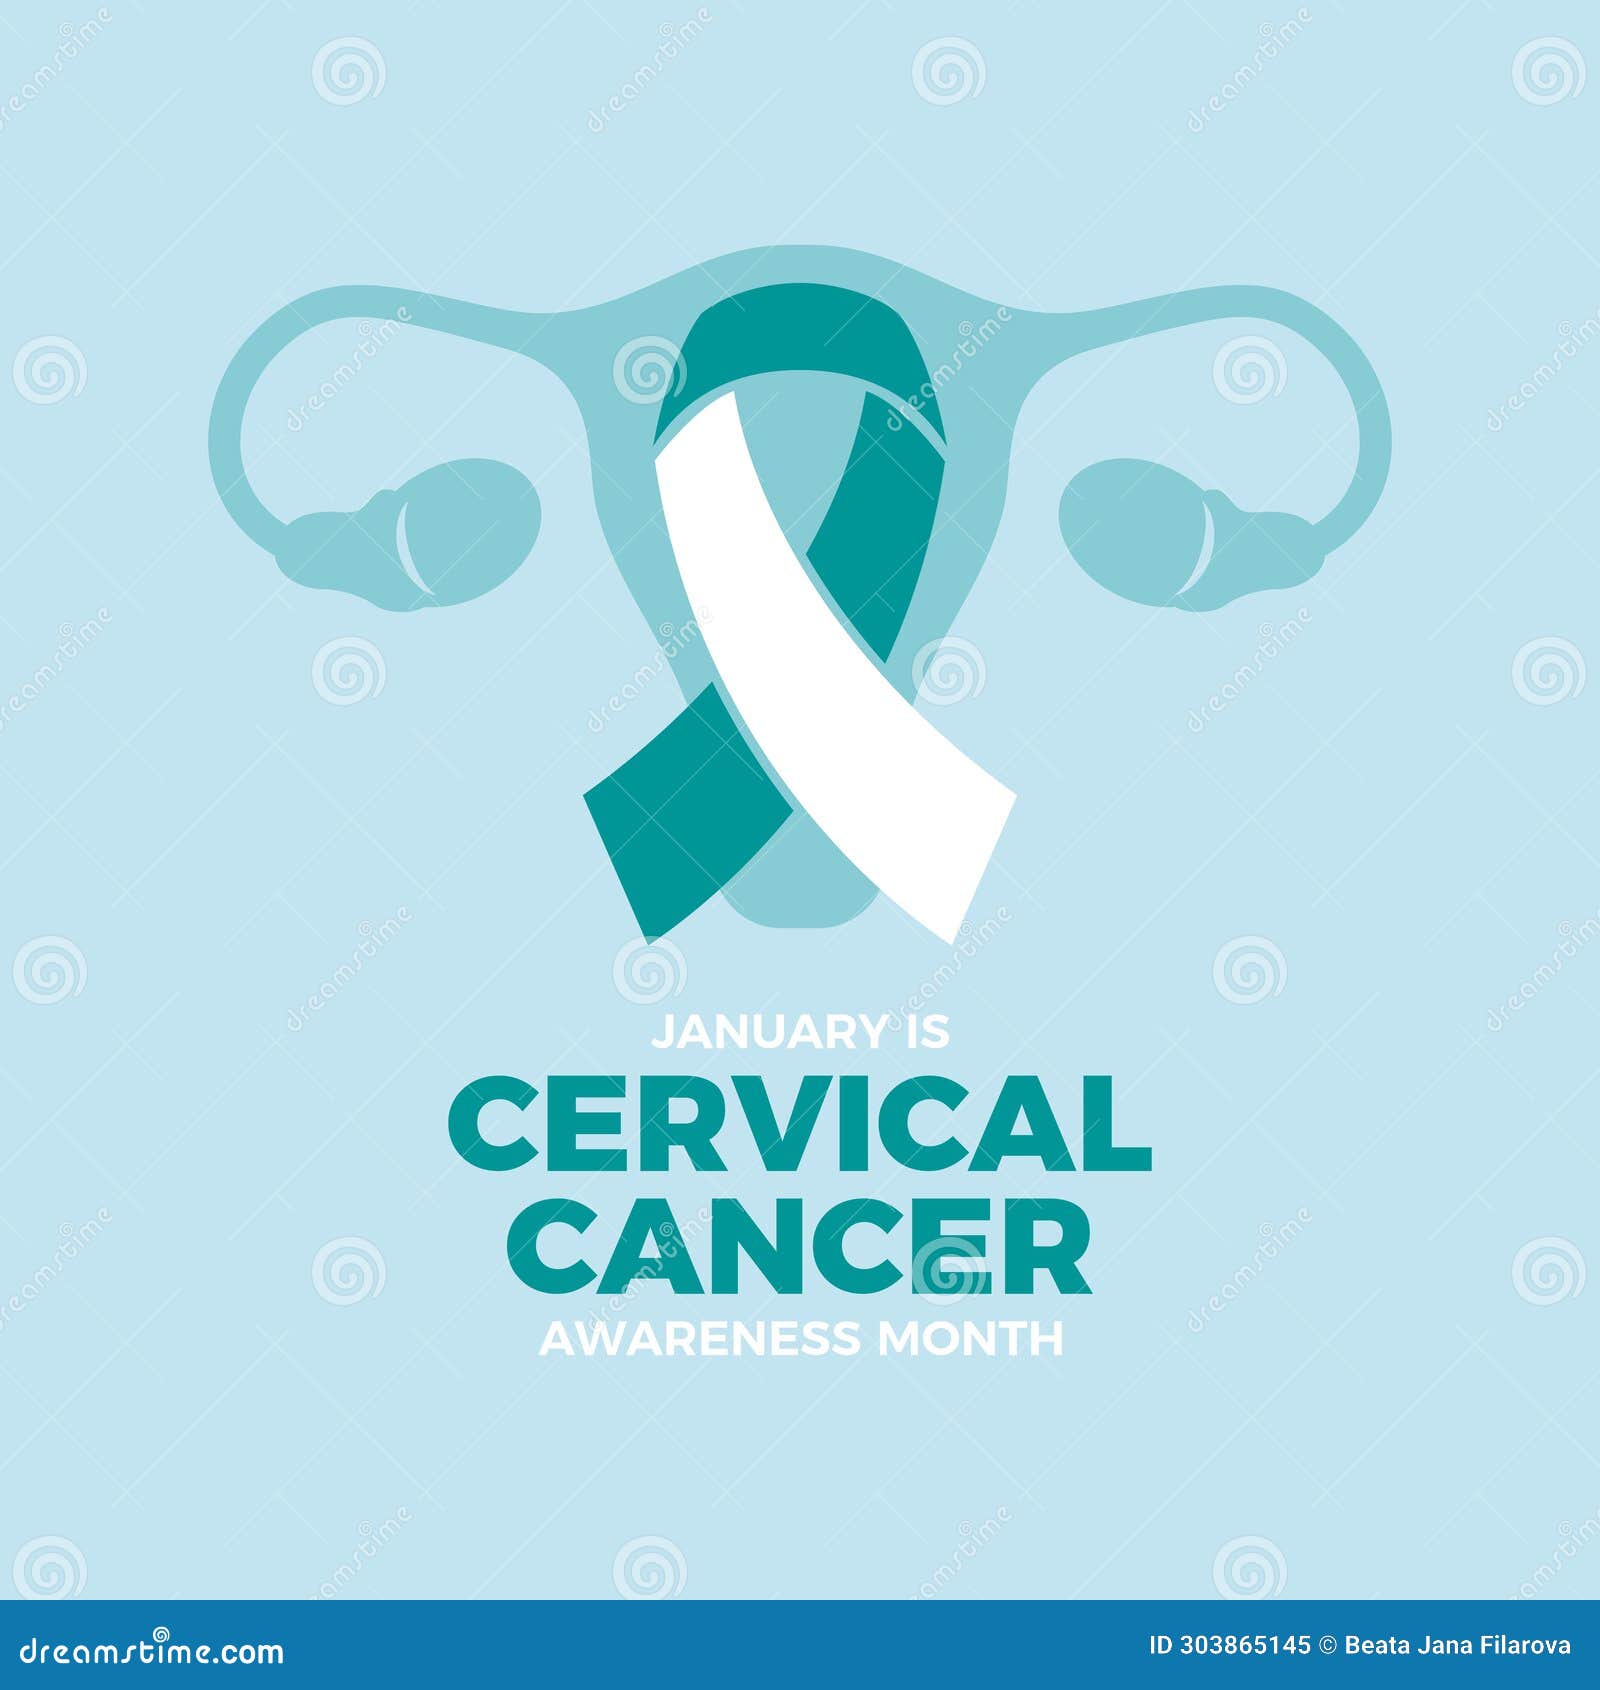 January is Cervical Cancer Awareness Month Poster Vector Illustration ...